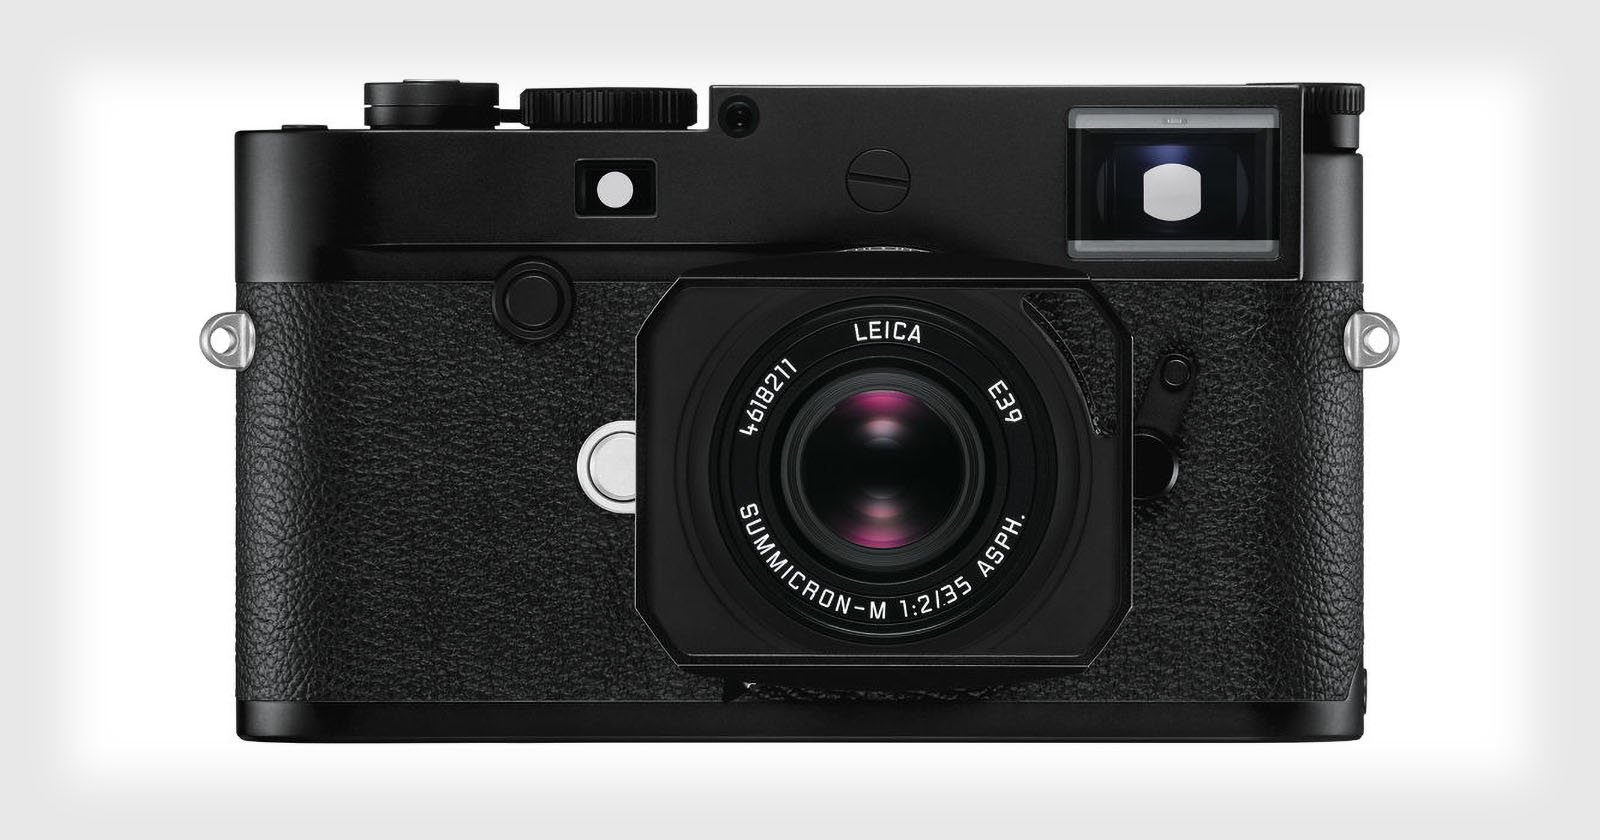 Leica M10-D: A Minimalist Analog-style Body with Wi-Fi Instead of an LCD